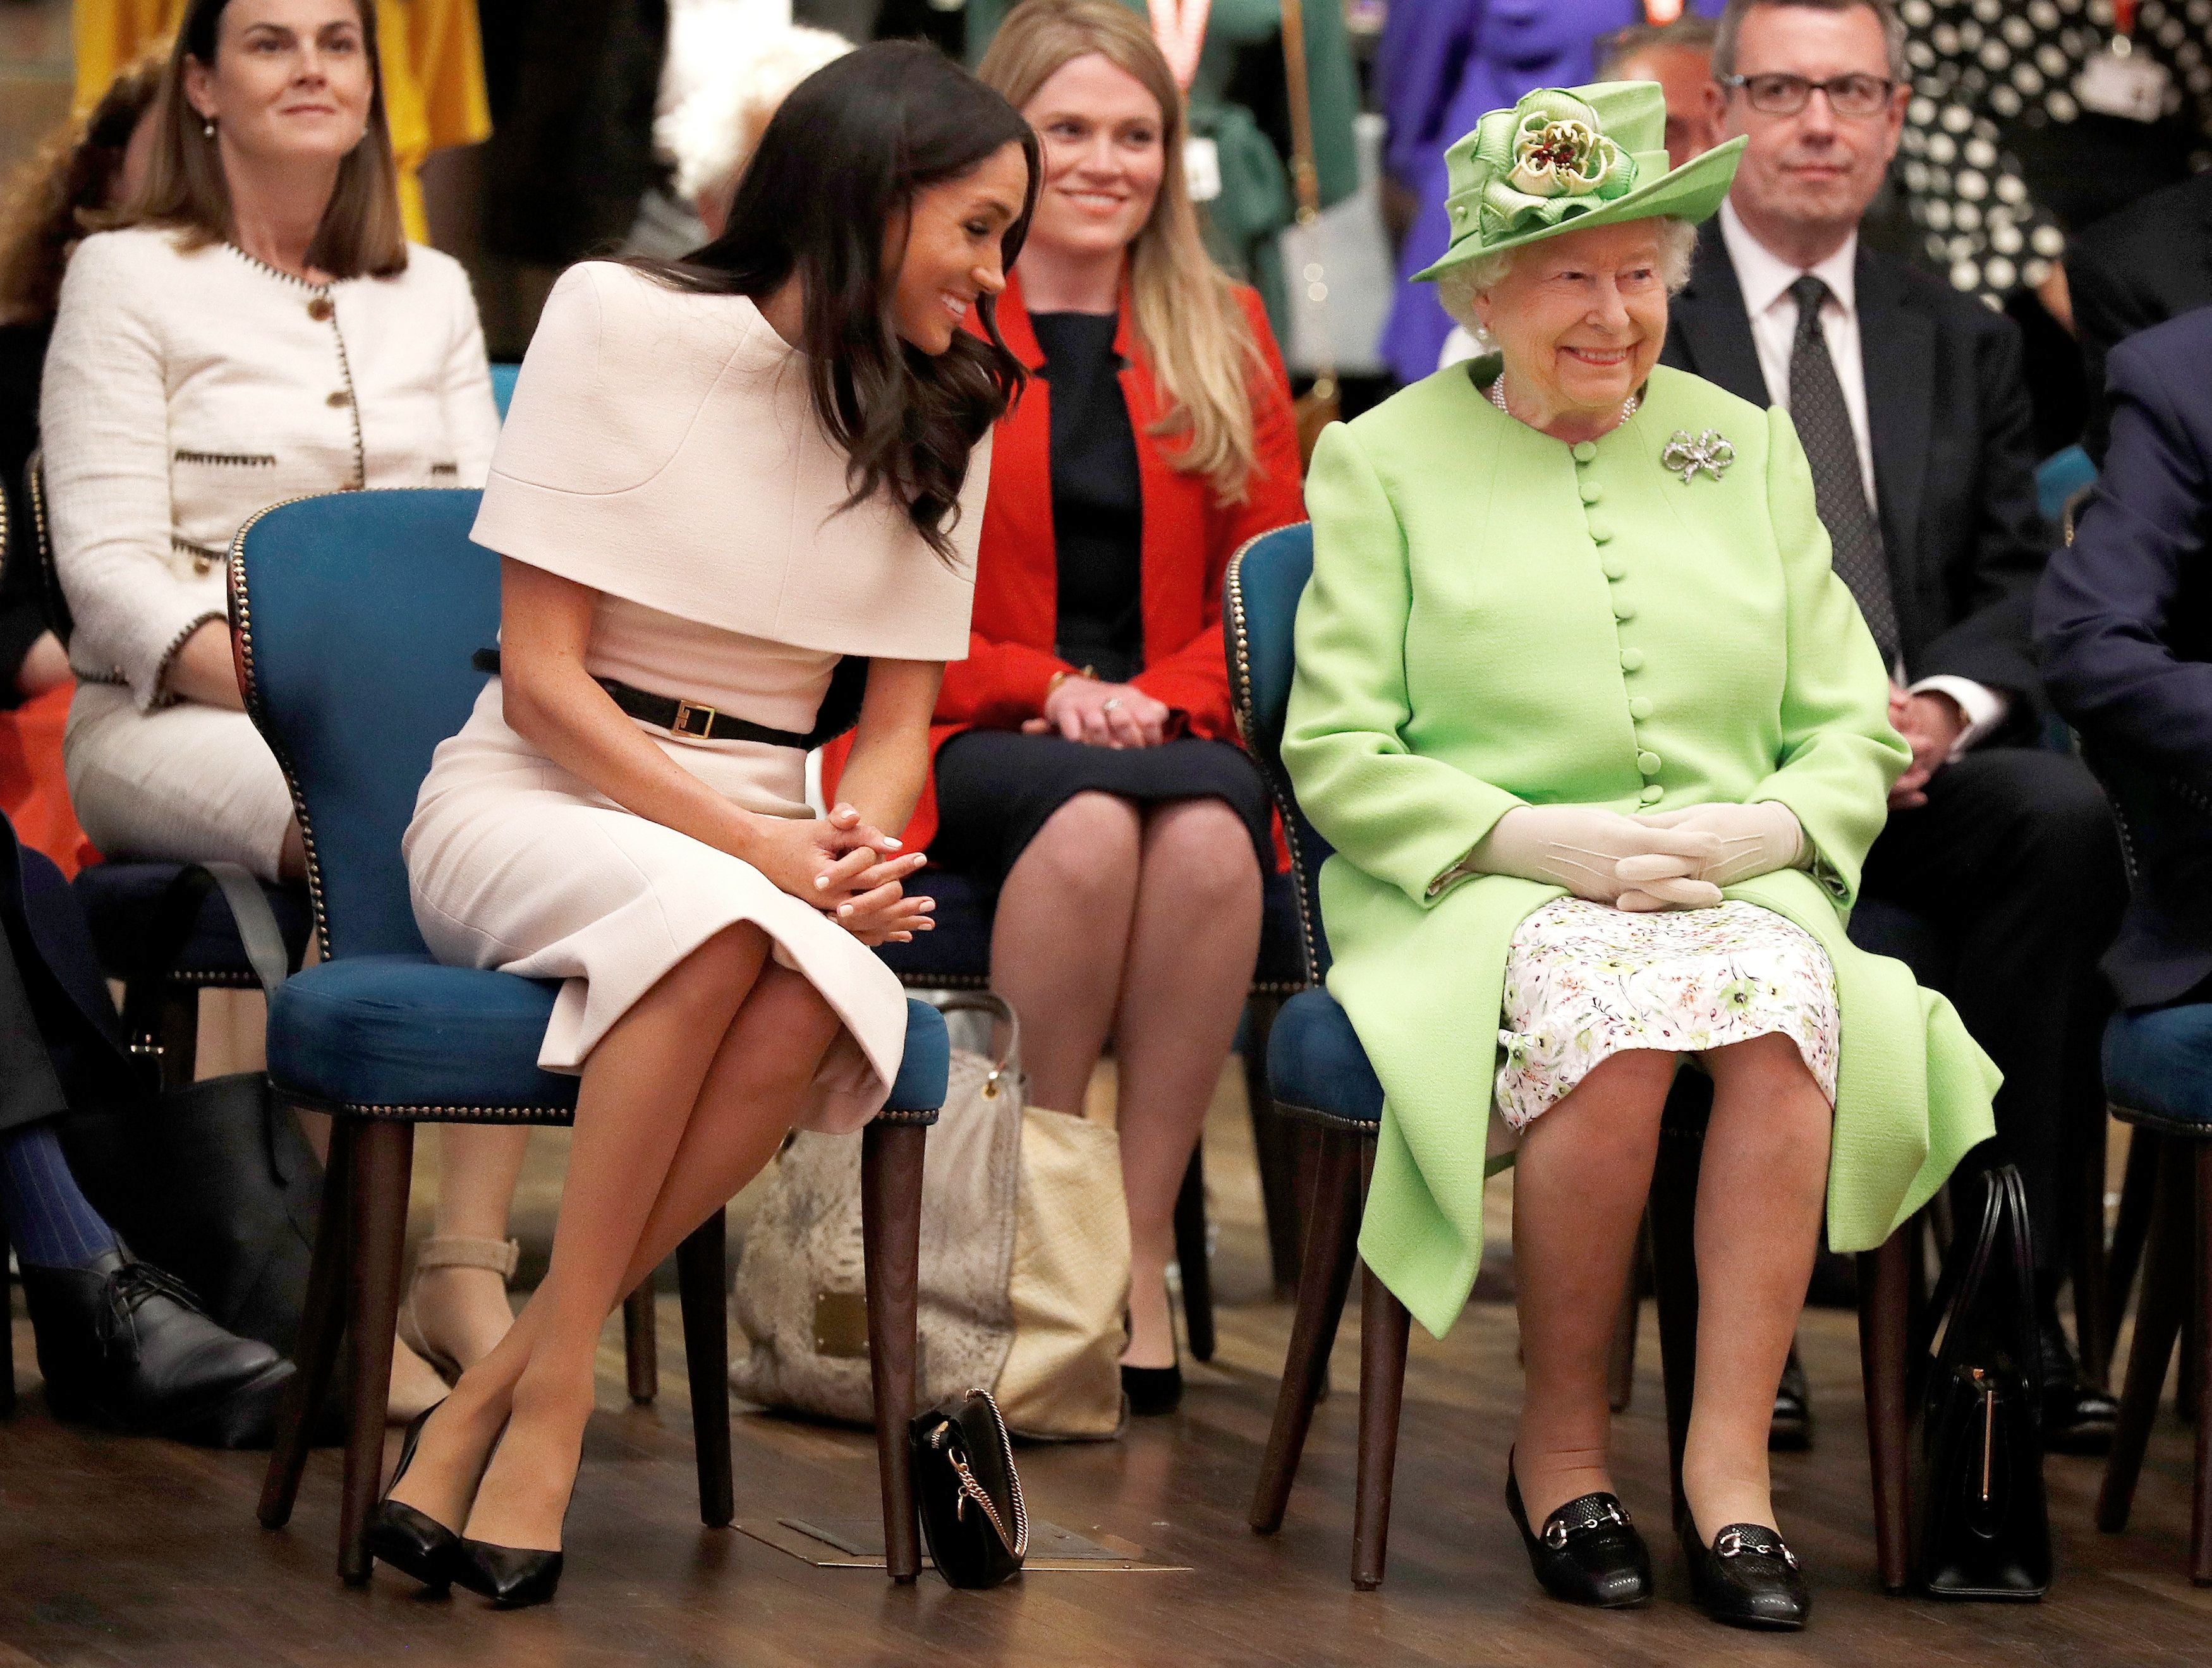 Queen Elizabeth II and Meghan, Duchess of Sussex gesture during their visit to the Storyhouse in Chester, Cheshire in 2018